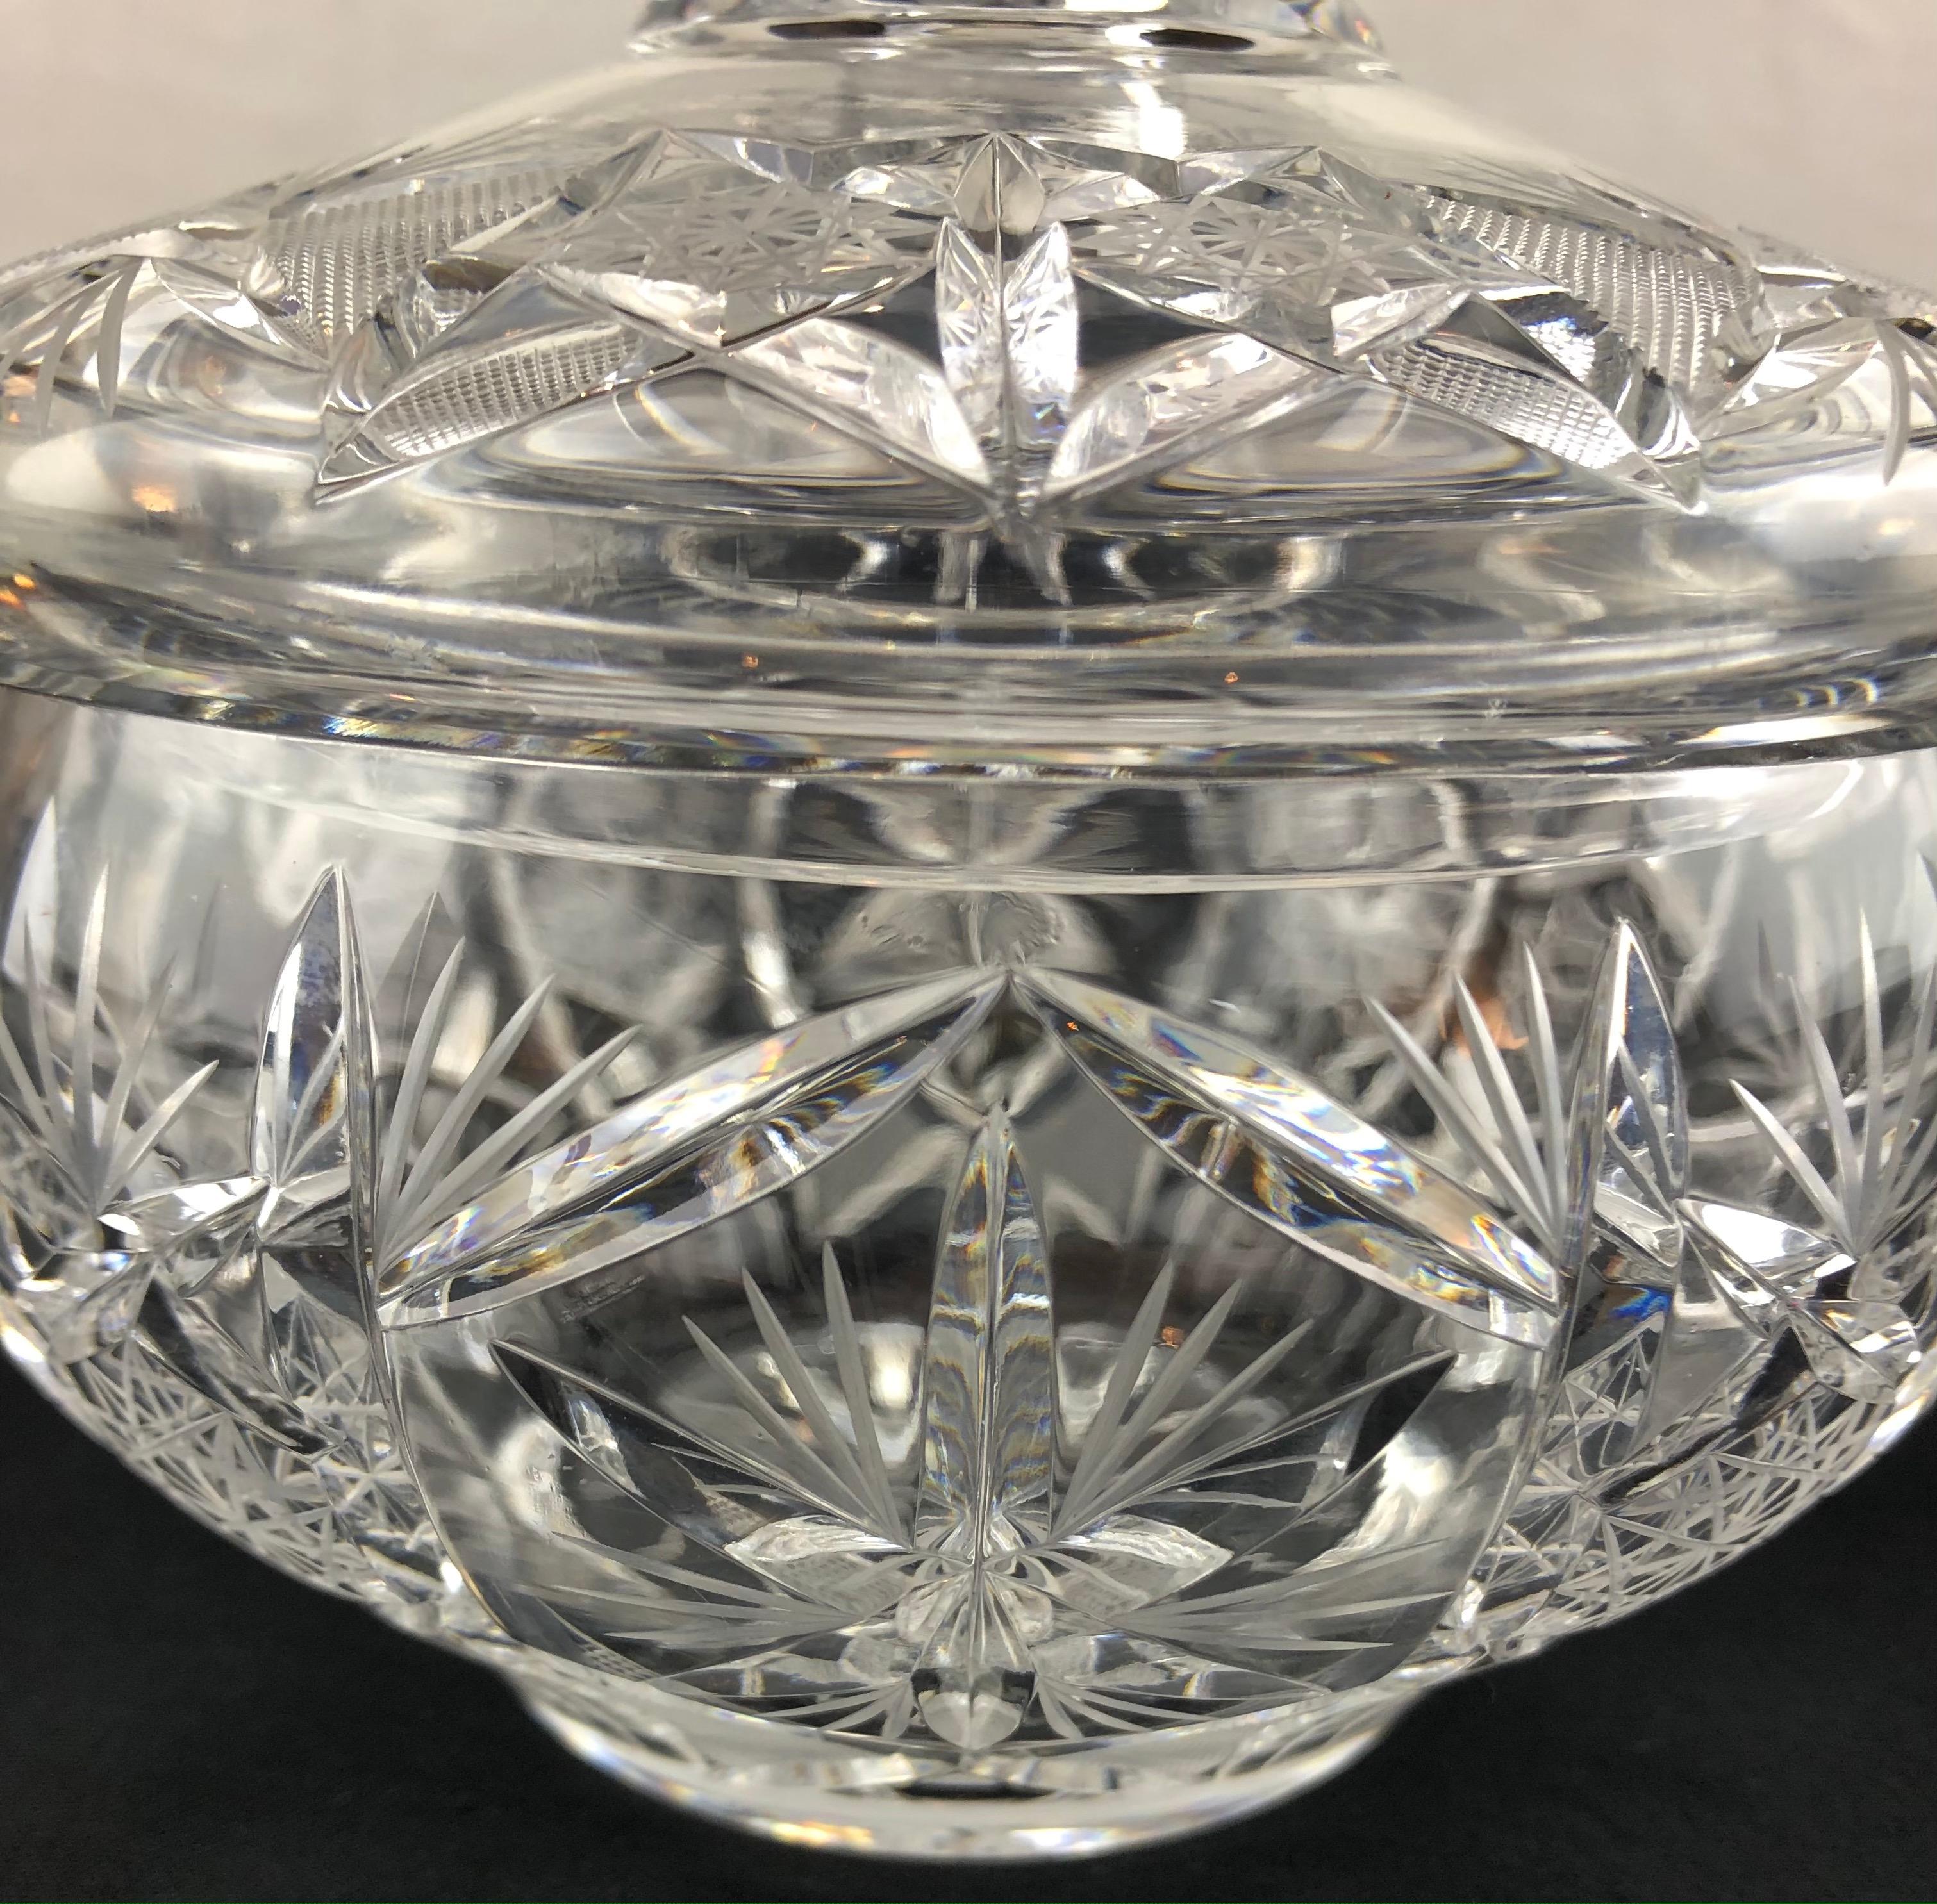 Beautiful and decorative crystal candy dish, trinket, or jewelry box attributed to Baccarat, Valery Klein design. 

Very good quality crystal, makes a lovely gift to oneself or others.

Measures: 5 3/4